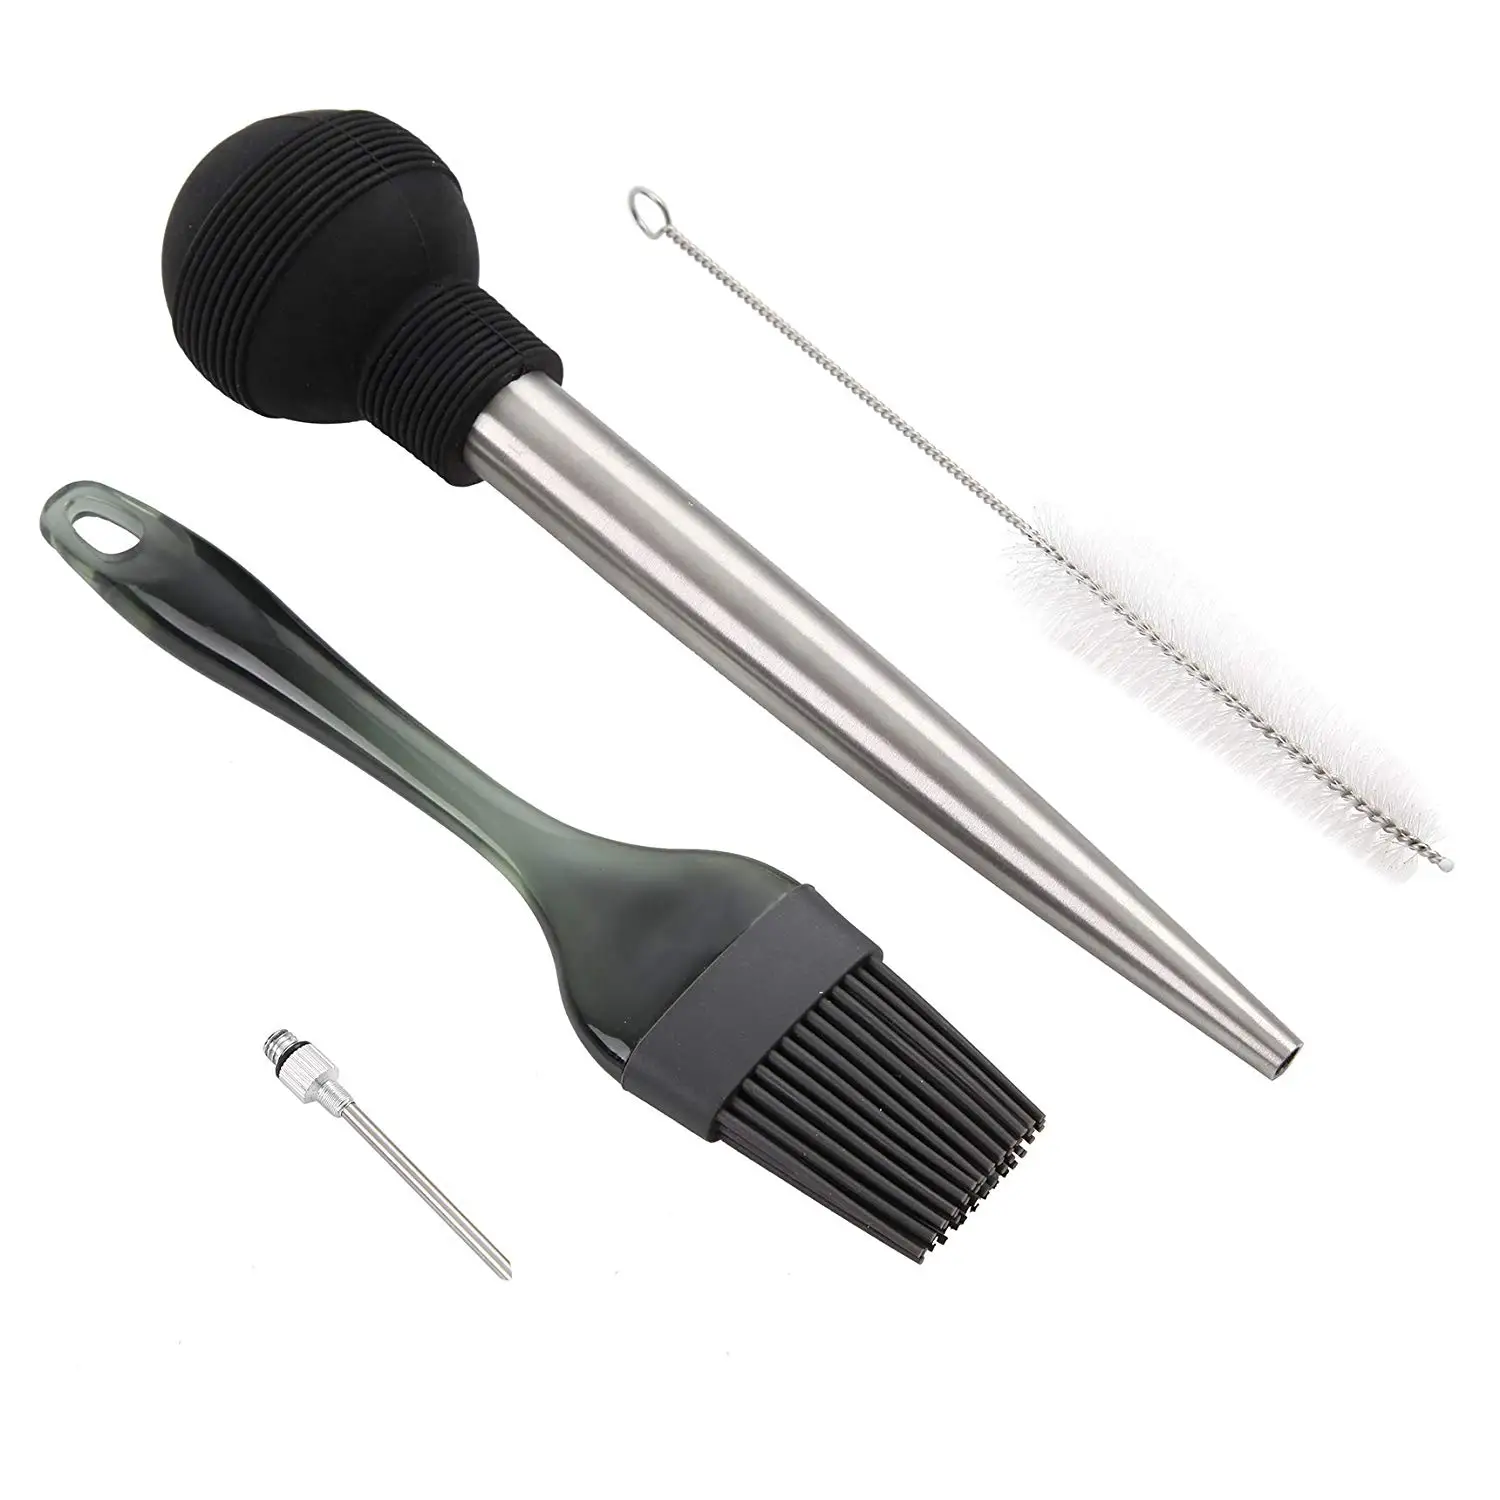 Best Utensils Stainless Steel Turkey Baster Commerical Grade Quality FDA Silicone Bulb Including Marinade Injector Needle and Brush for Easy Clean Up Rose Gold 